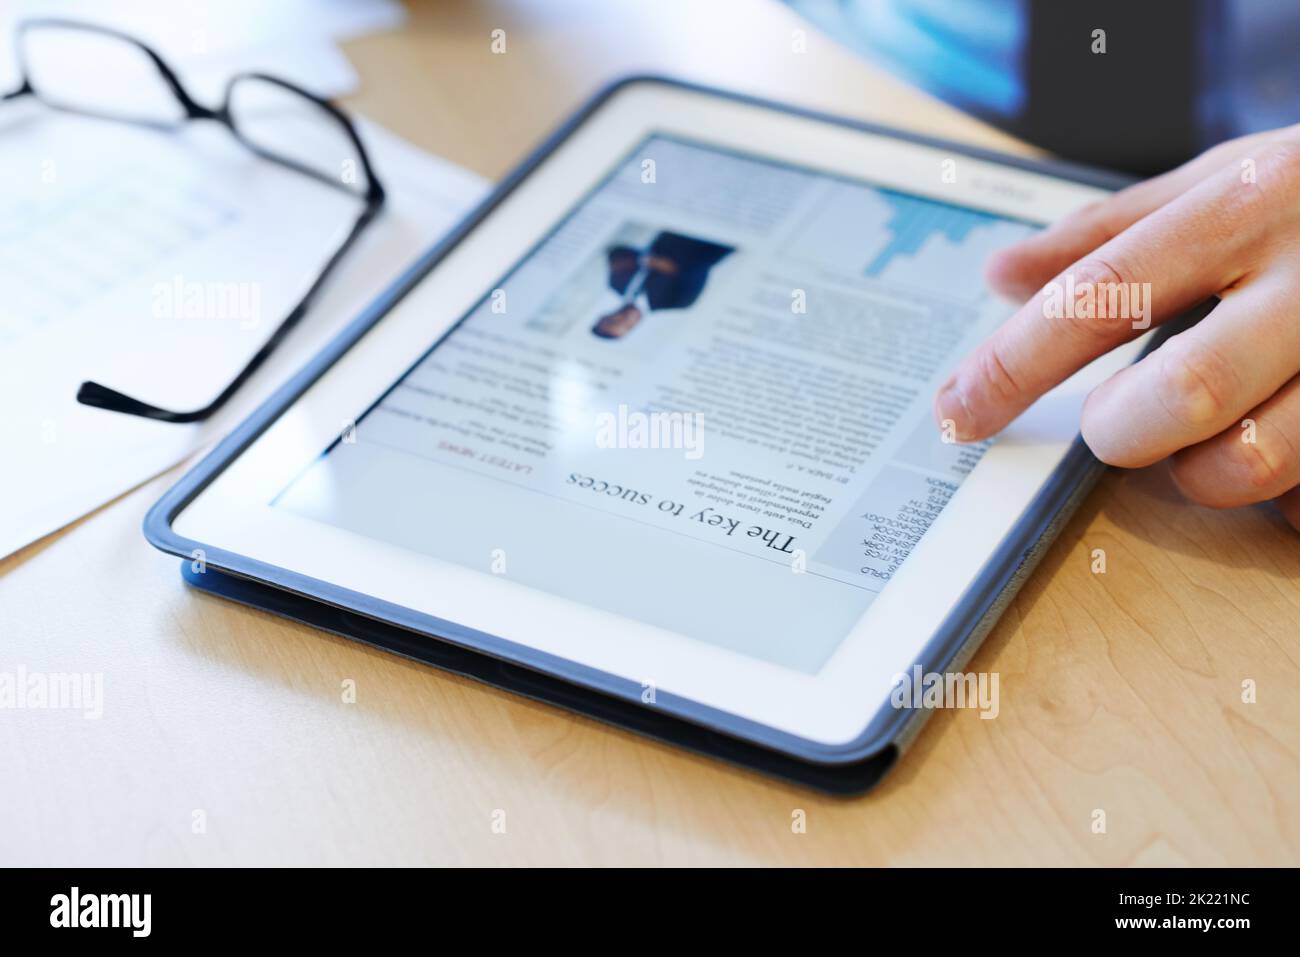 Perusing the business periodicals online. Cropped closeup shot of a businessman working on a digital tablet. Stock Photo